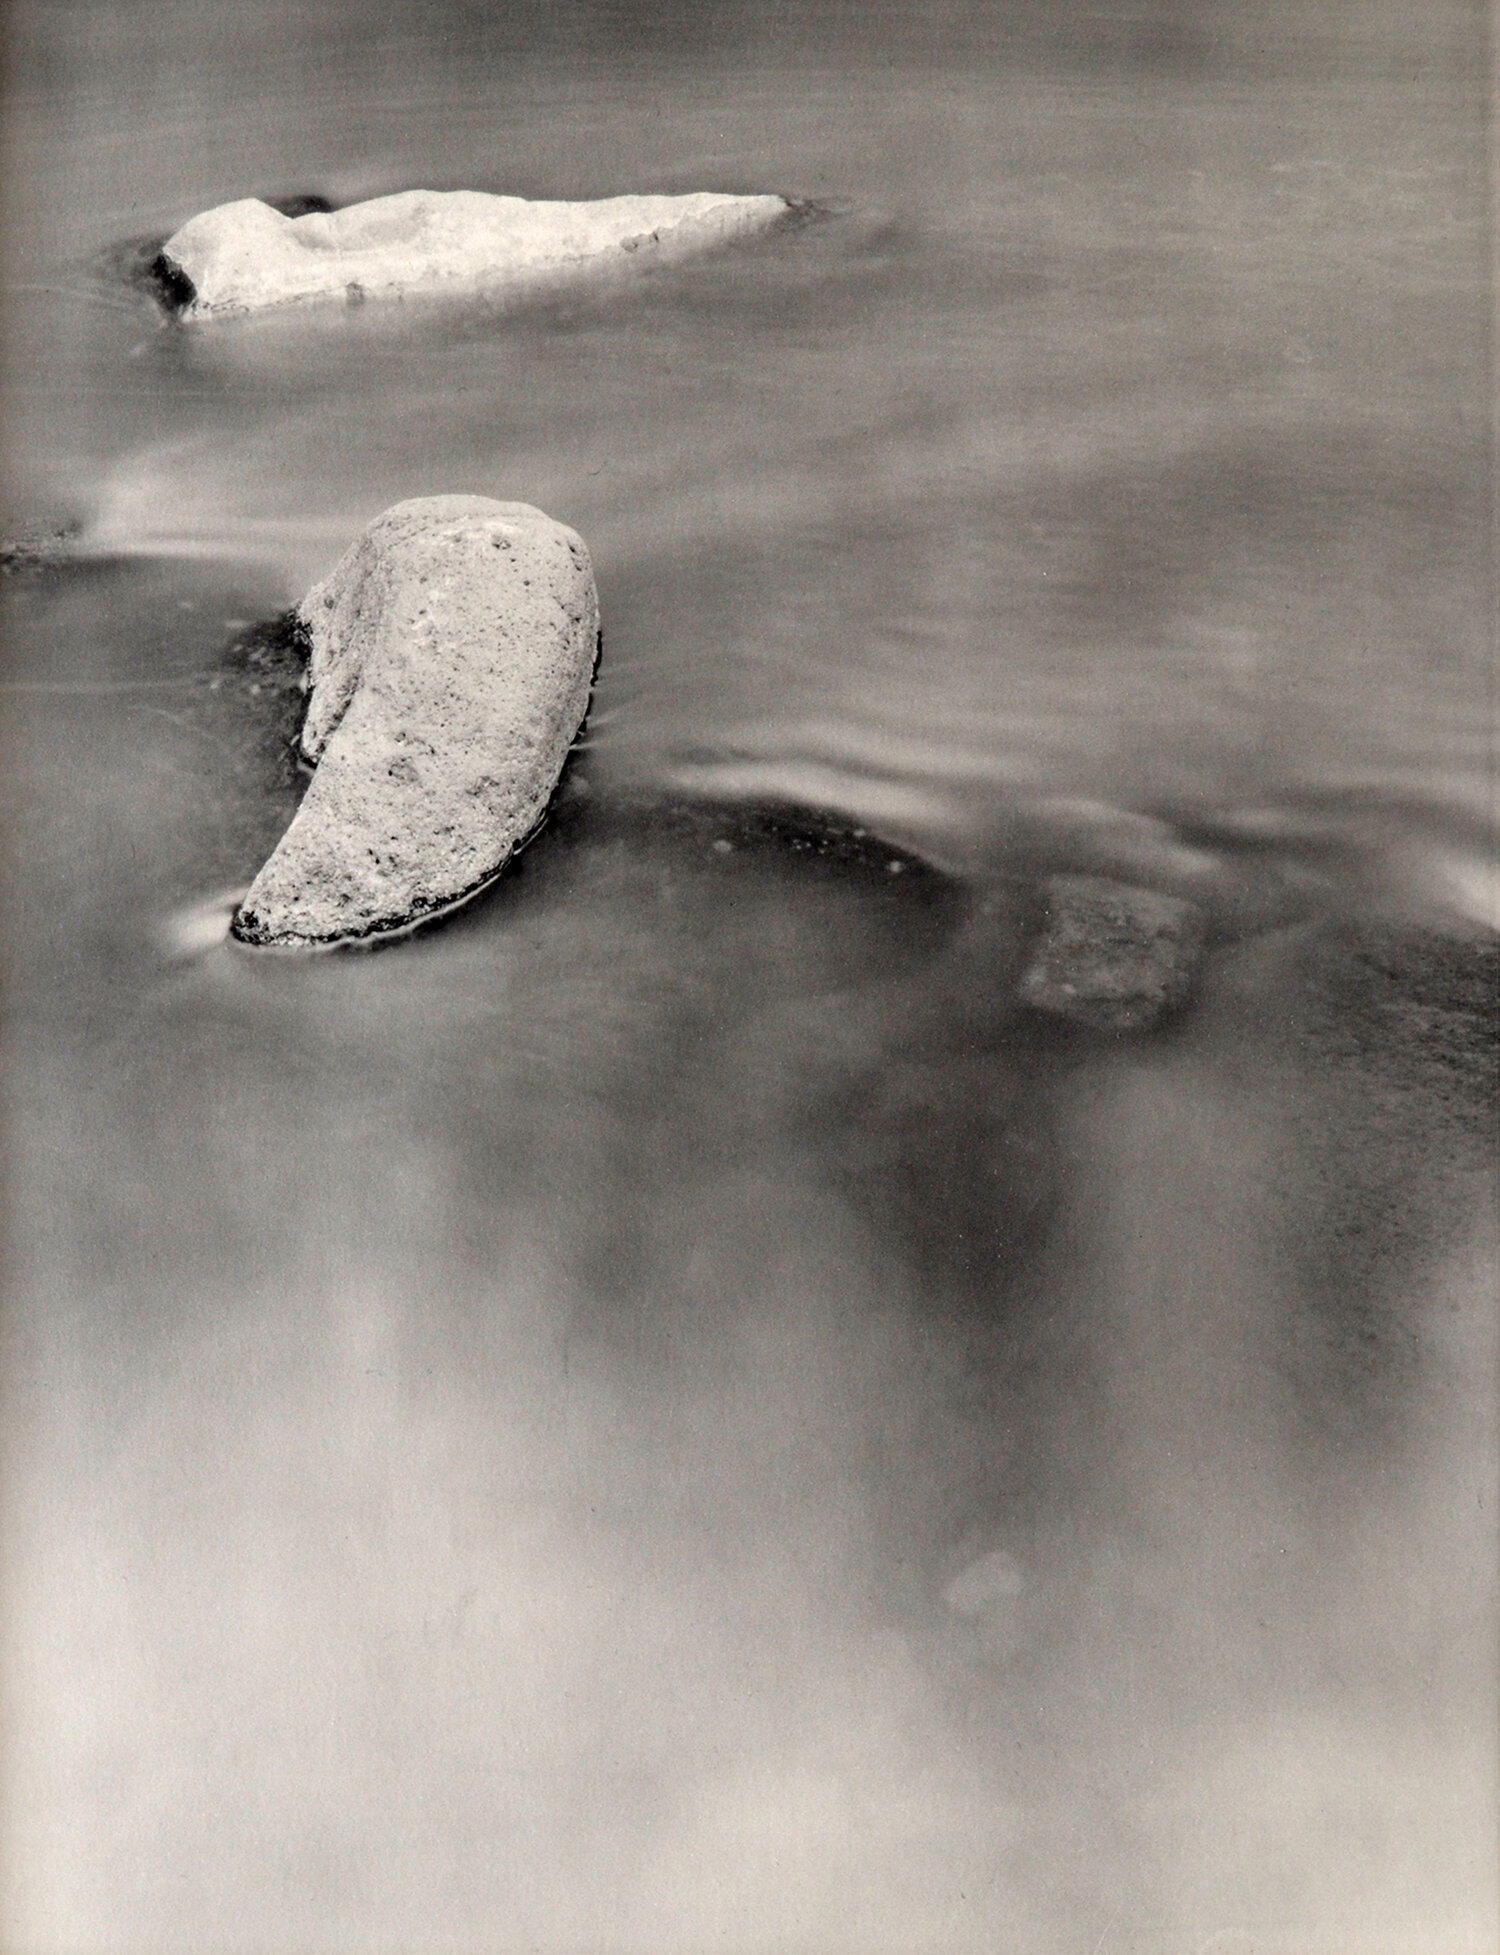 Janet Russek: Pi - Holding Together (Union): Two Stones, Jemez River, New Mexico, 1985